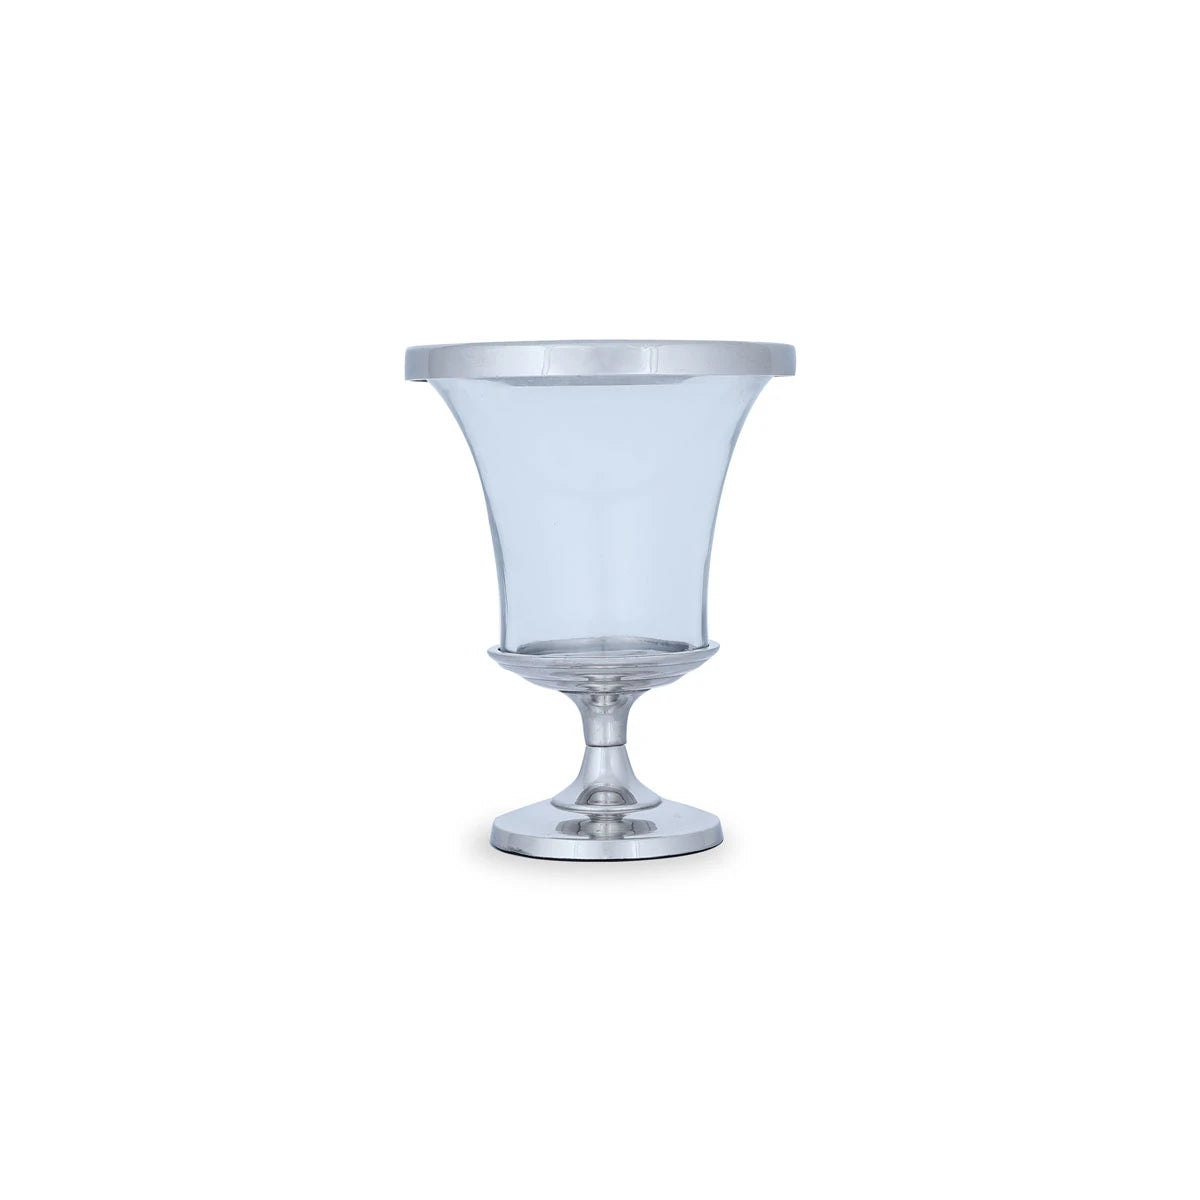 Flat View of Glass Candle Holder